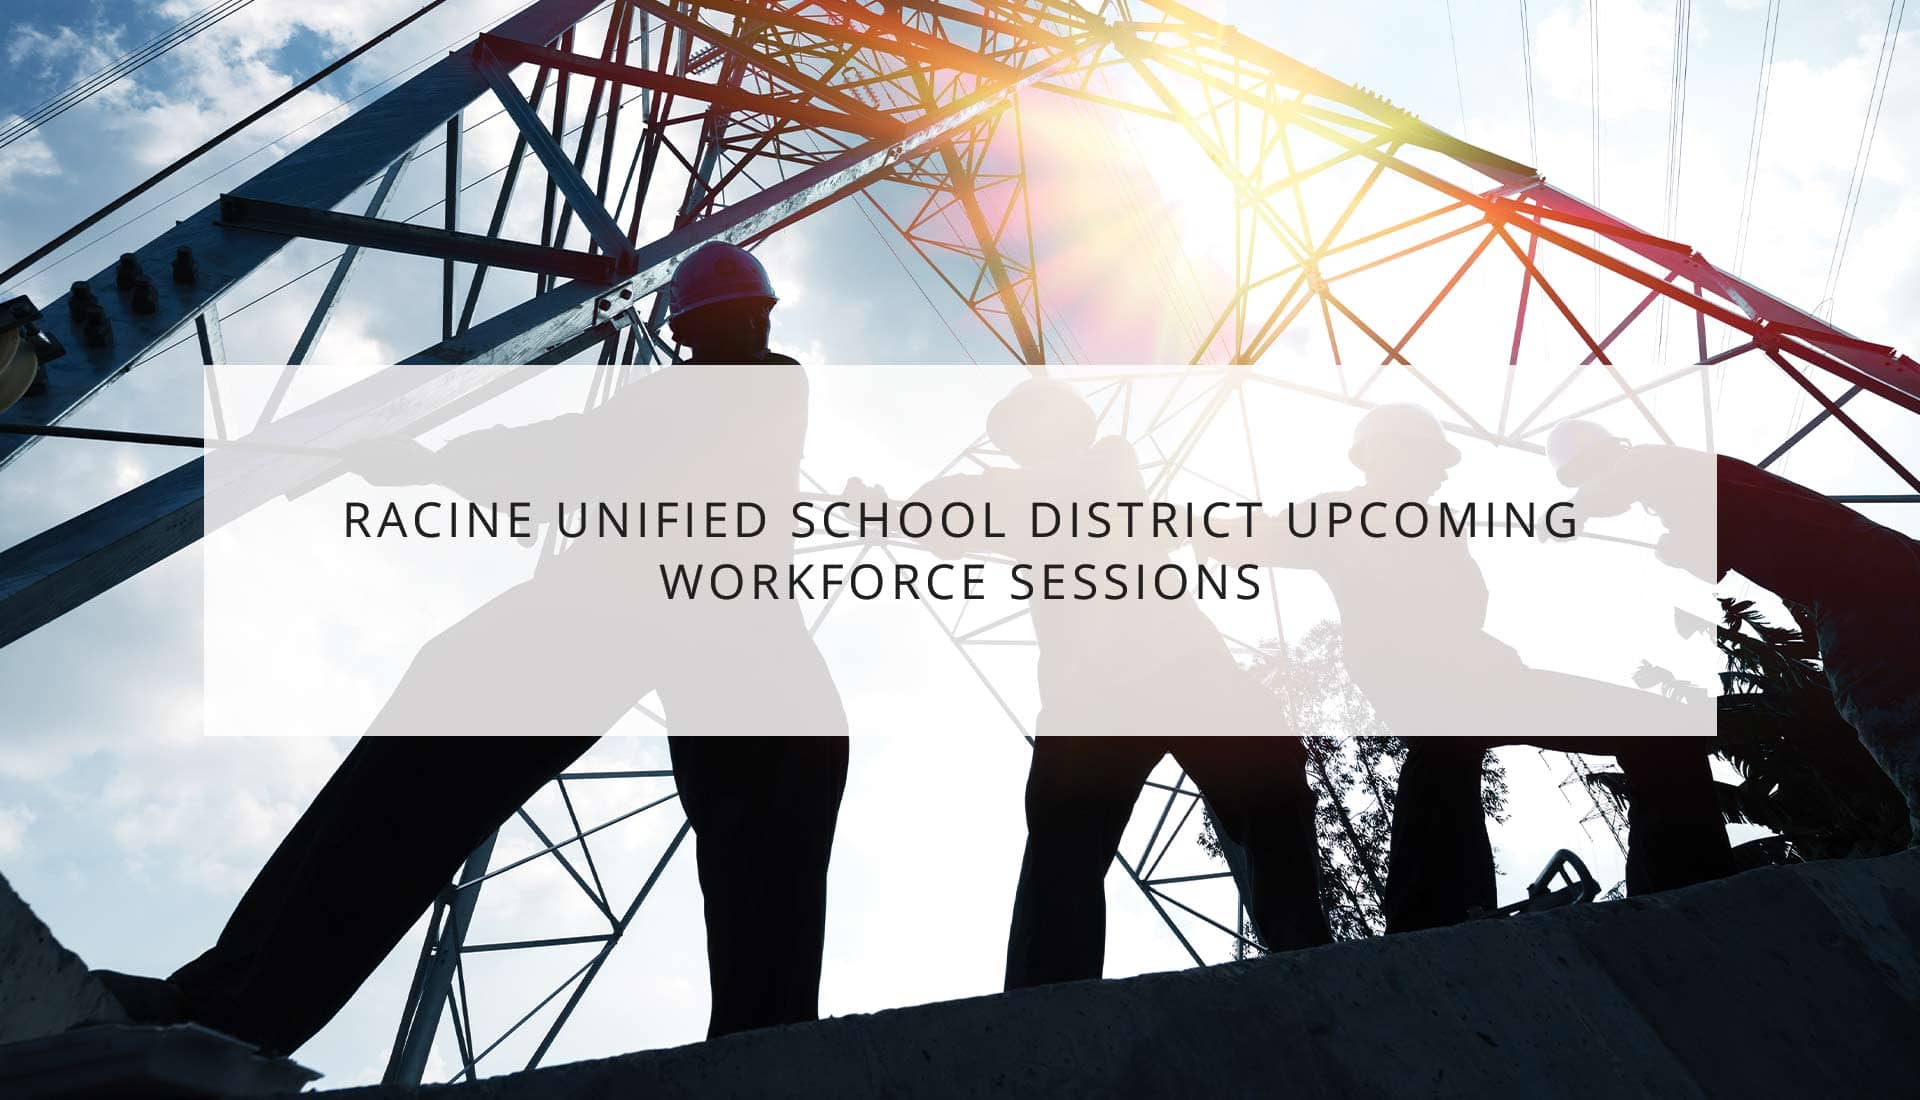 Racine Unified School District Upcoming Workforce Sessions